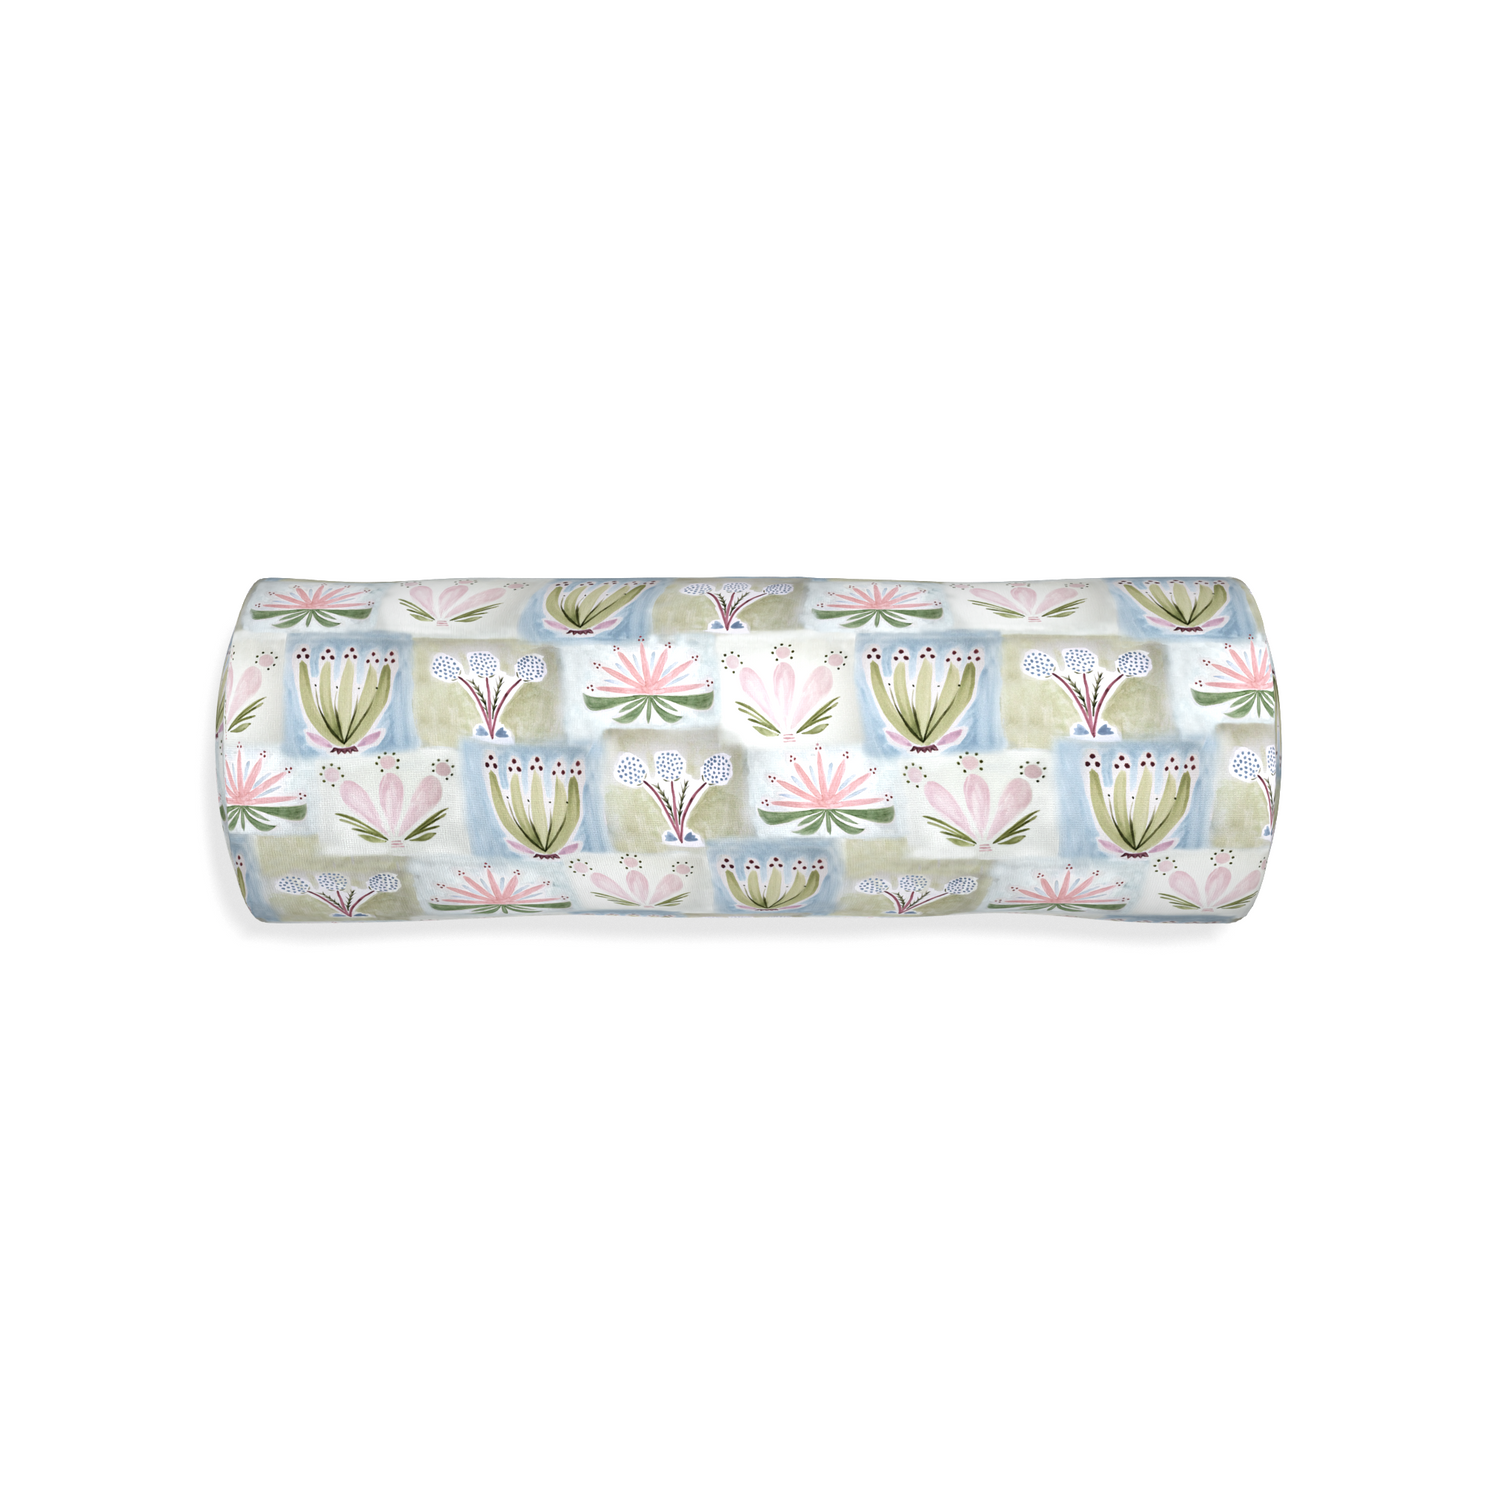 Bolster harper custom hand-painted floralpillow with none on white background